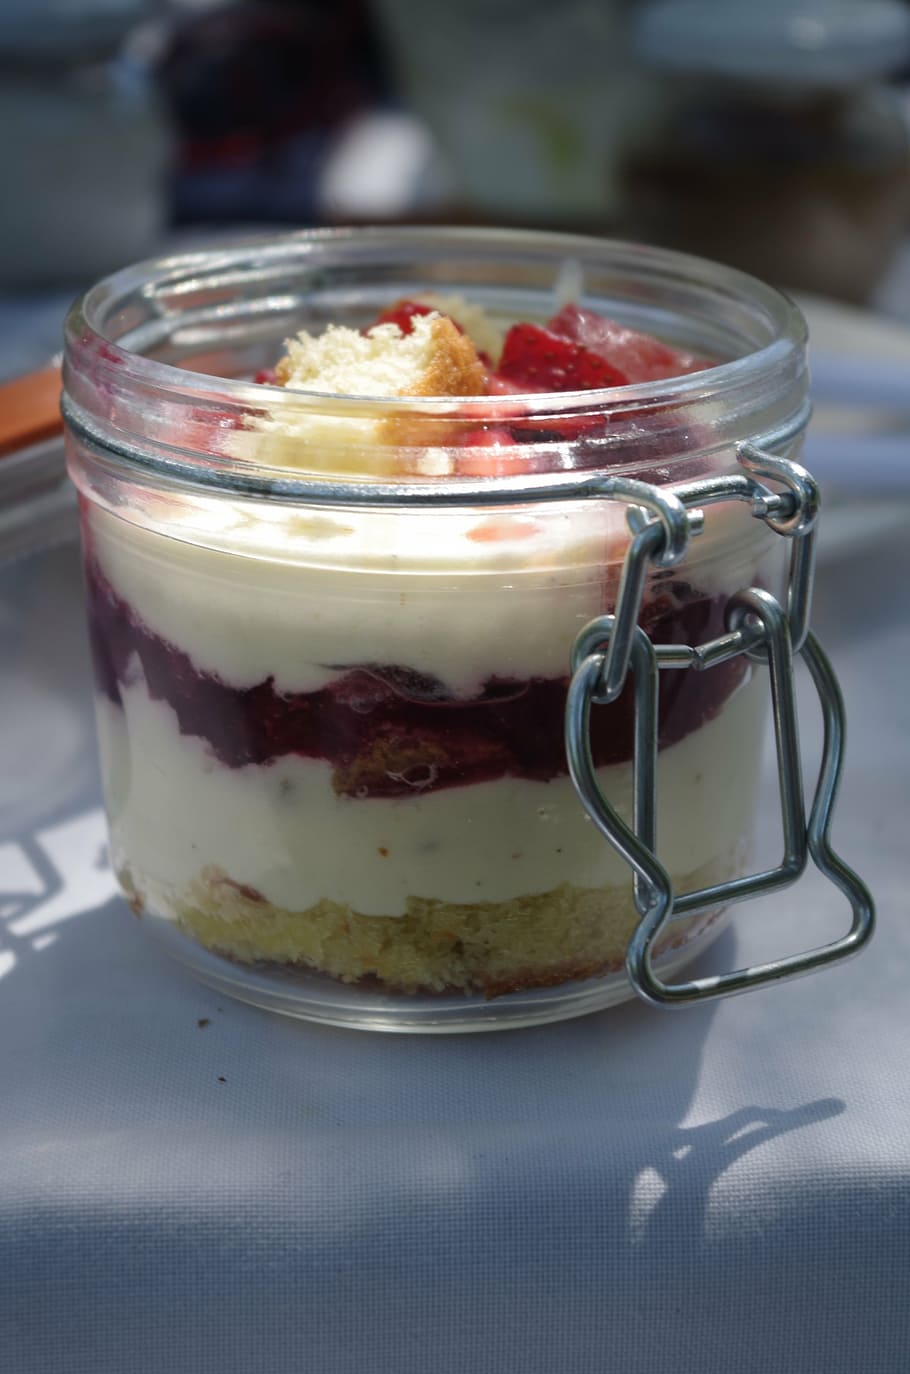 trifle, calories in a bottle, delicious, sweet, fresh, picnic lunch, colorful, strawberries, custard, cream